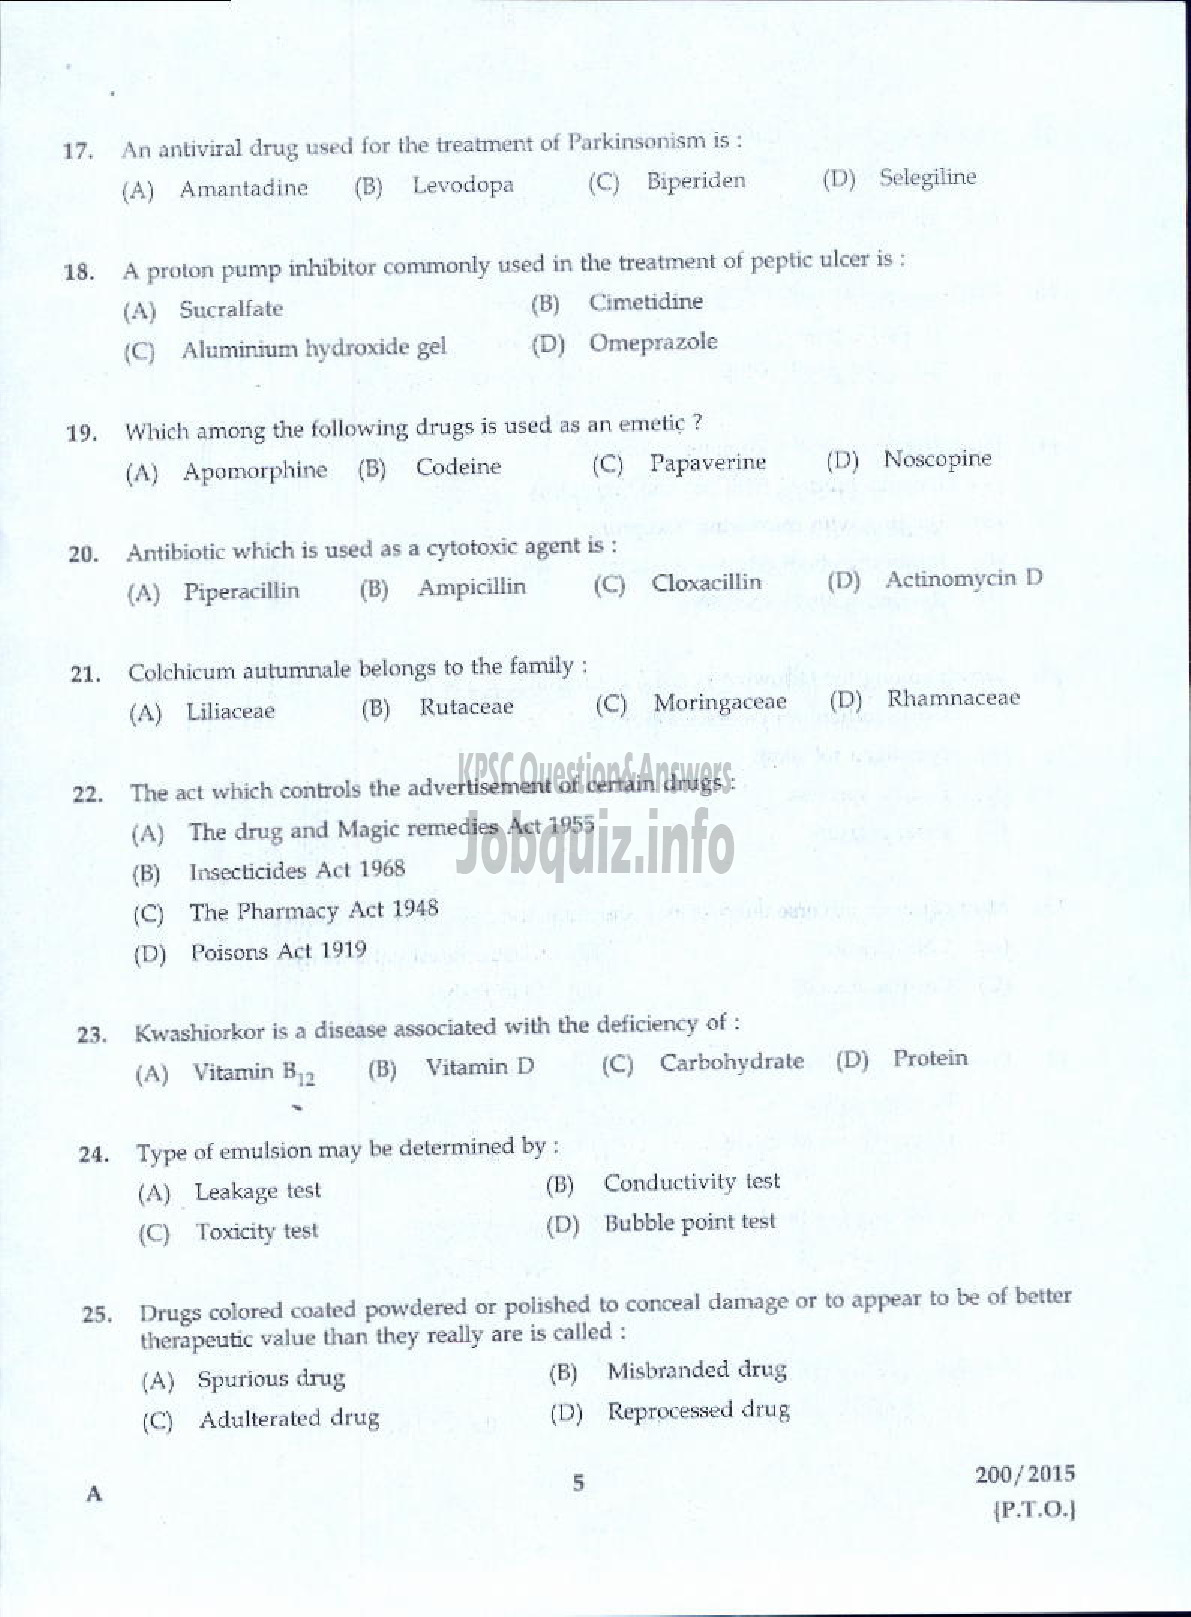 Kerala PSC Question Paper - PHARMACIST GR II HEALTH SERVICES-3